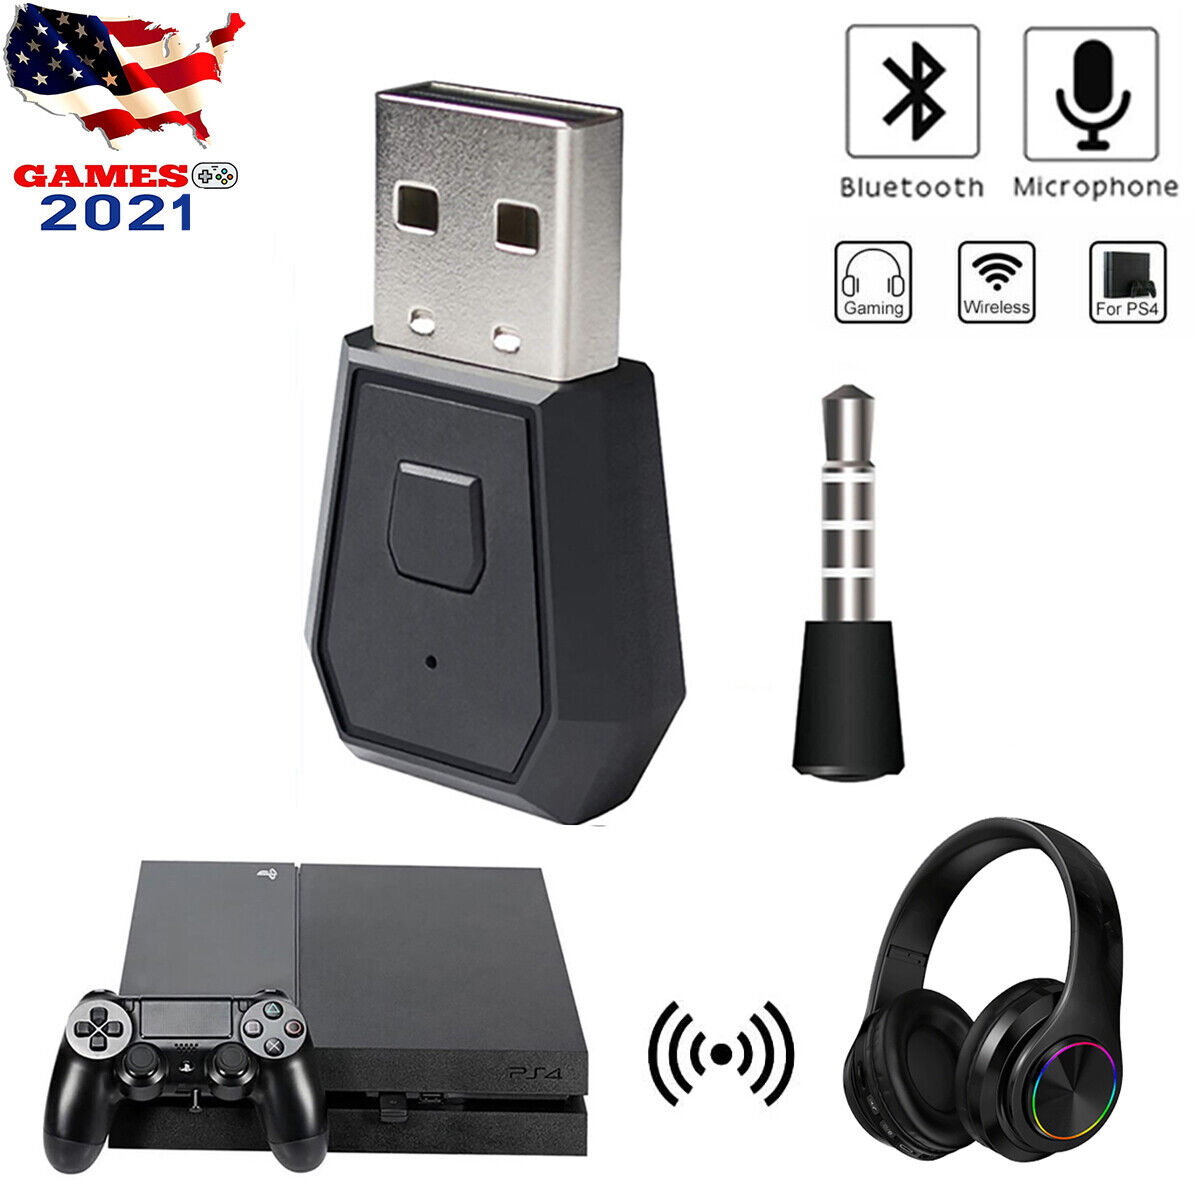 Mini Wireless Bluetooth Headset USB Dongle Receiver Adapter for PS4 Slim Pro PC